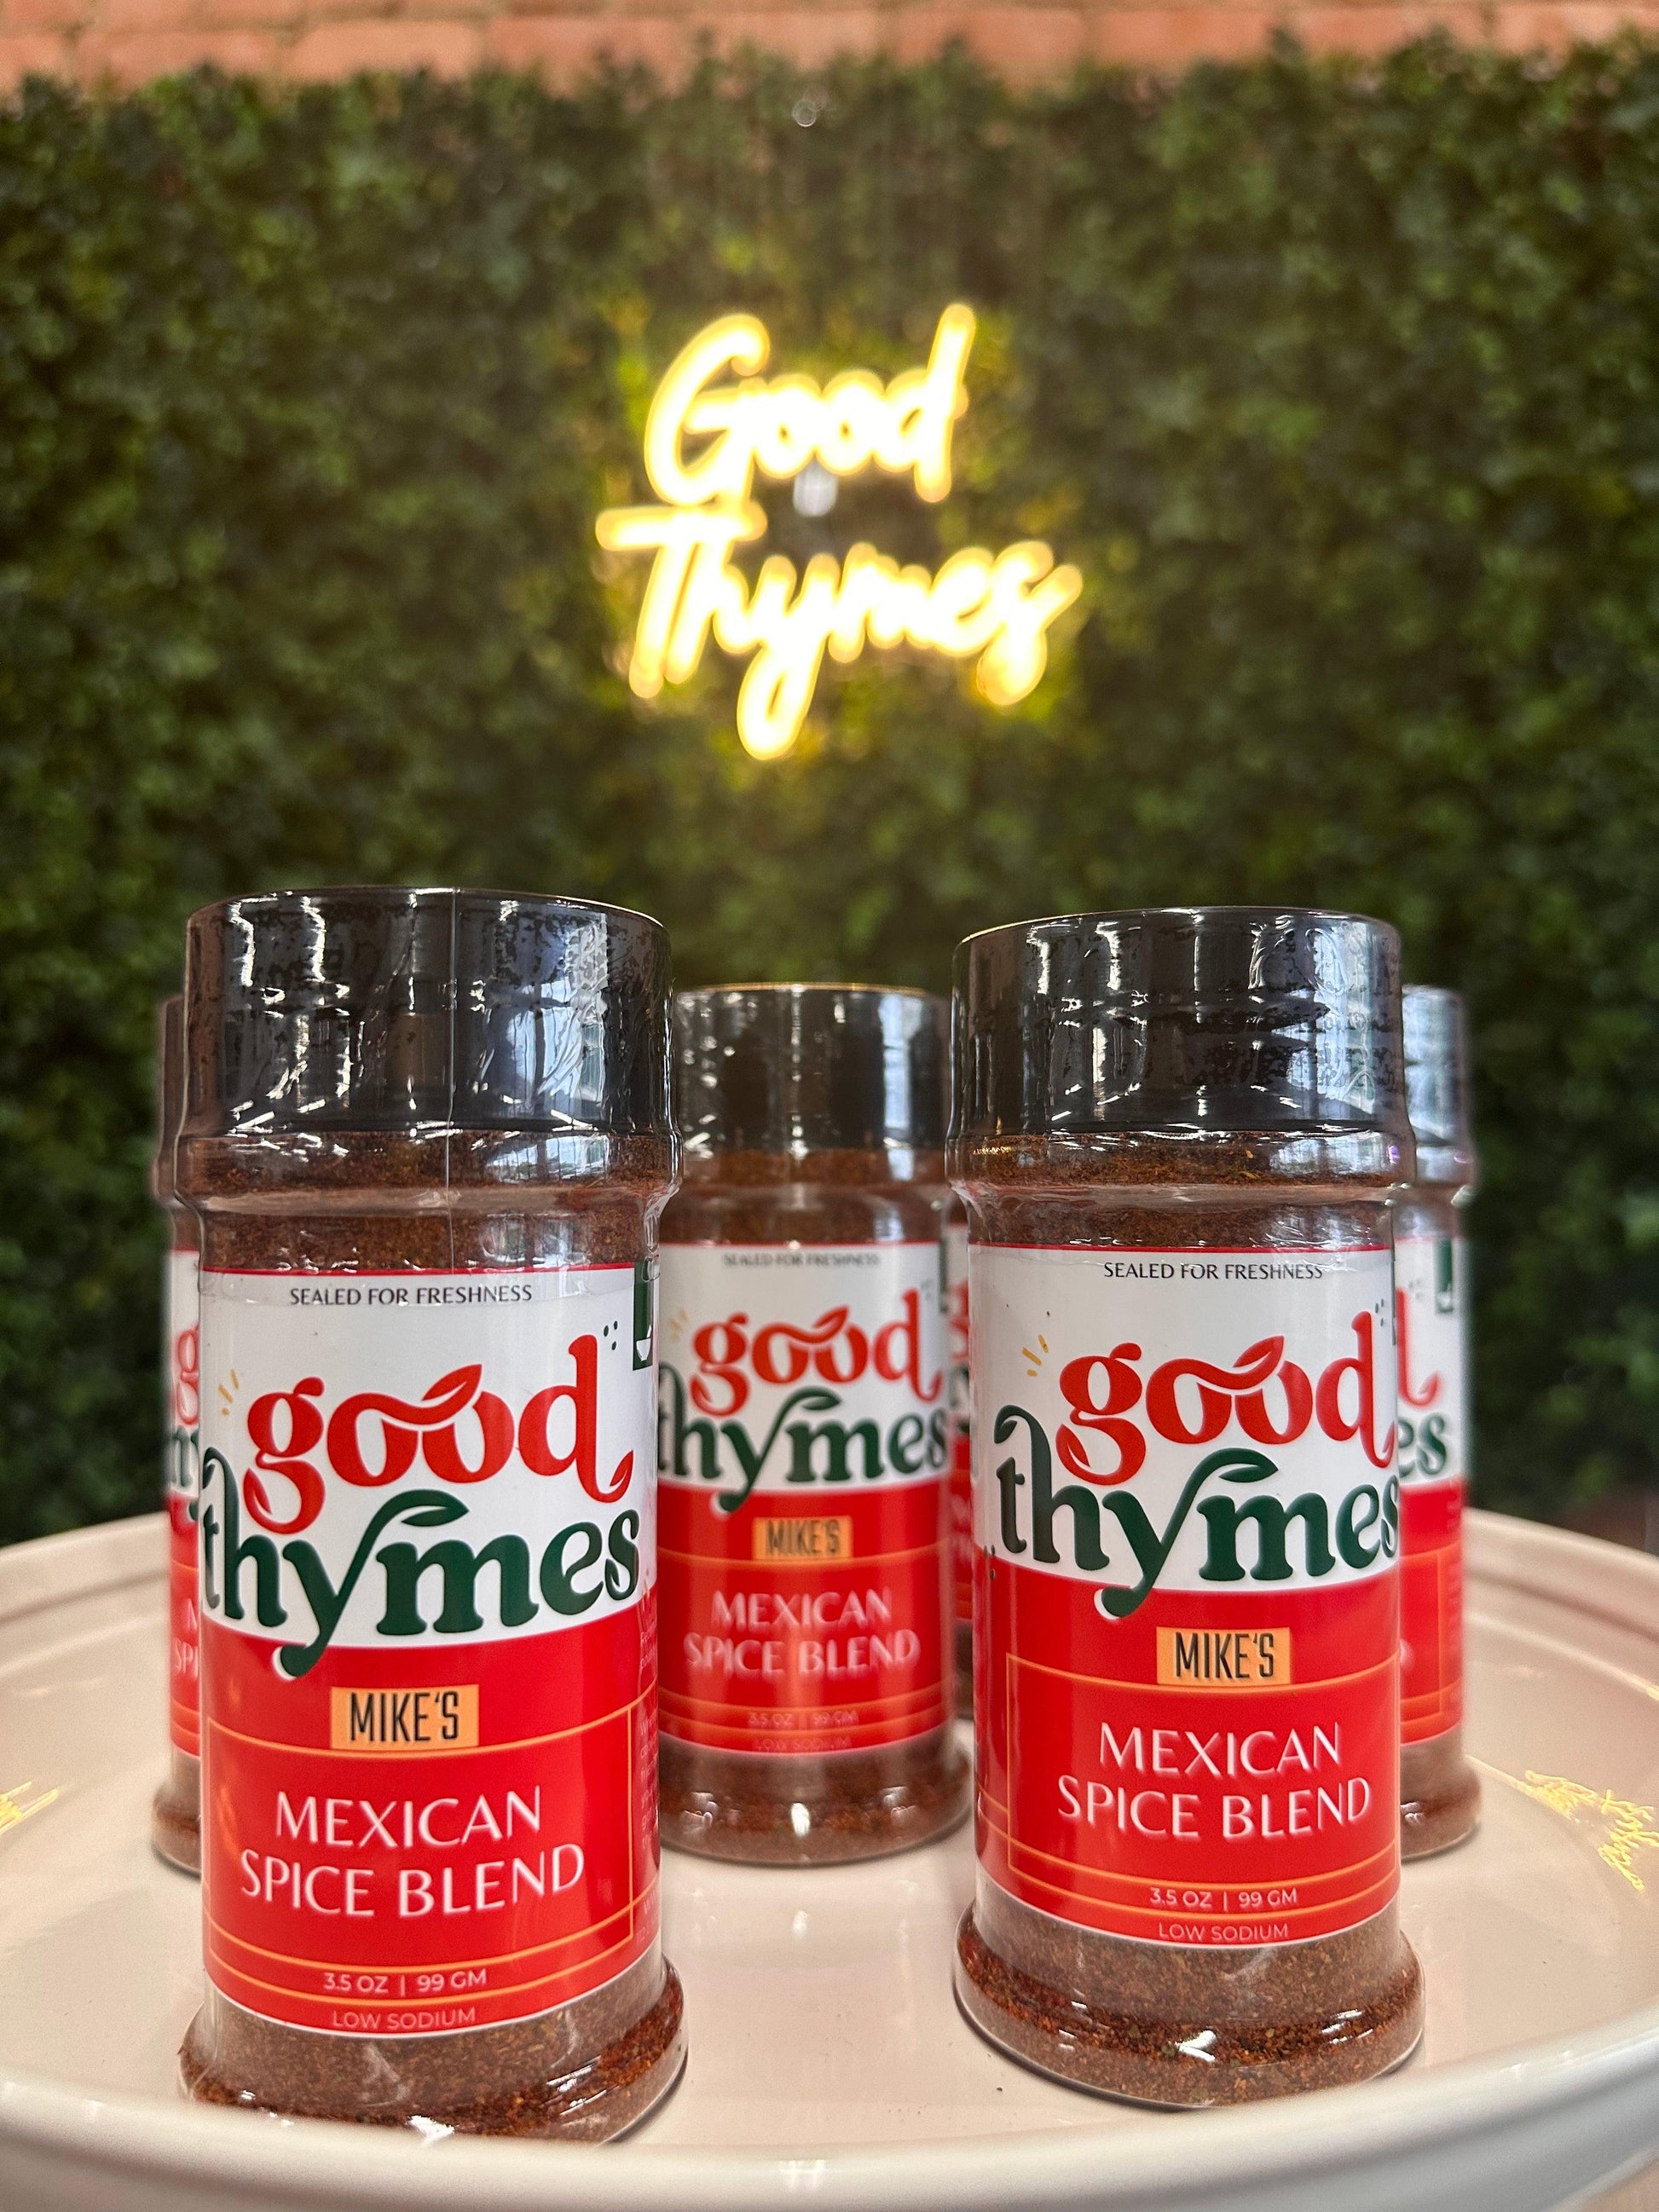 Mike’s Mexican Seasoning - Good Thymes